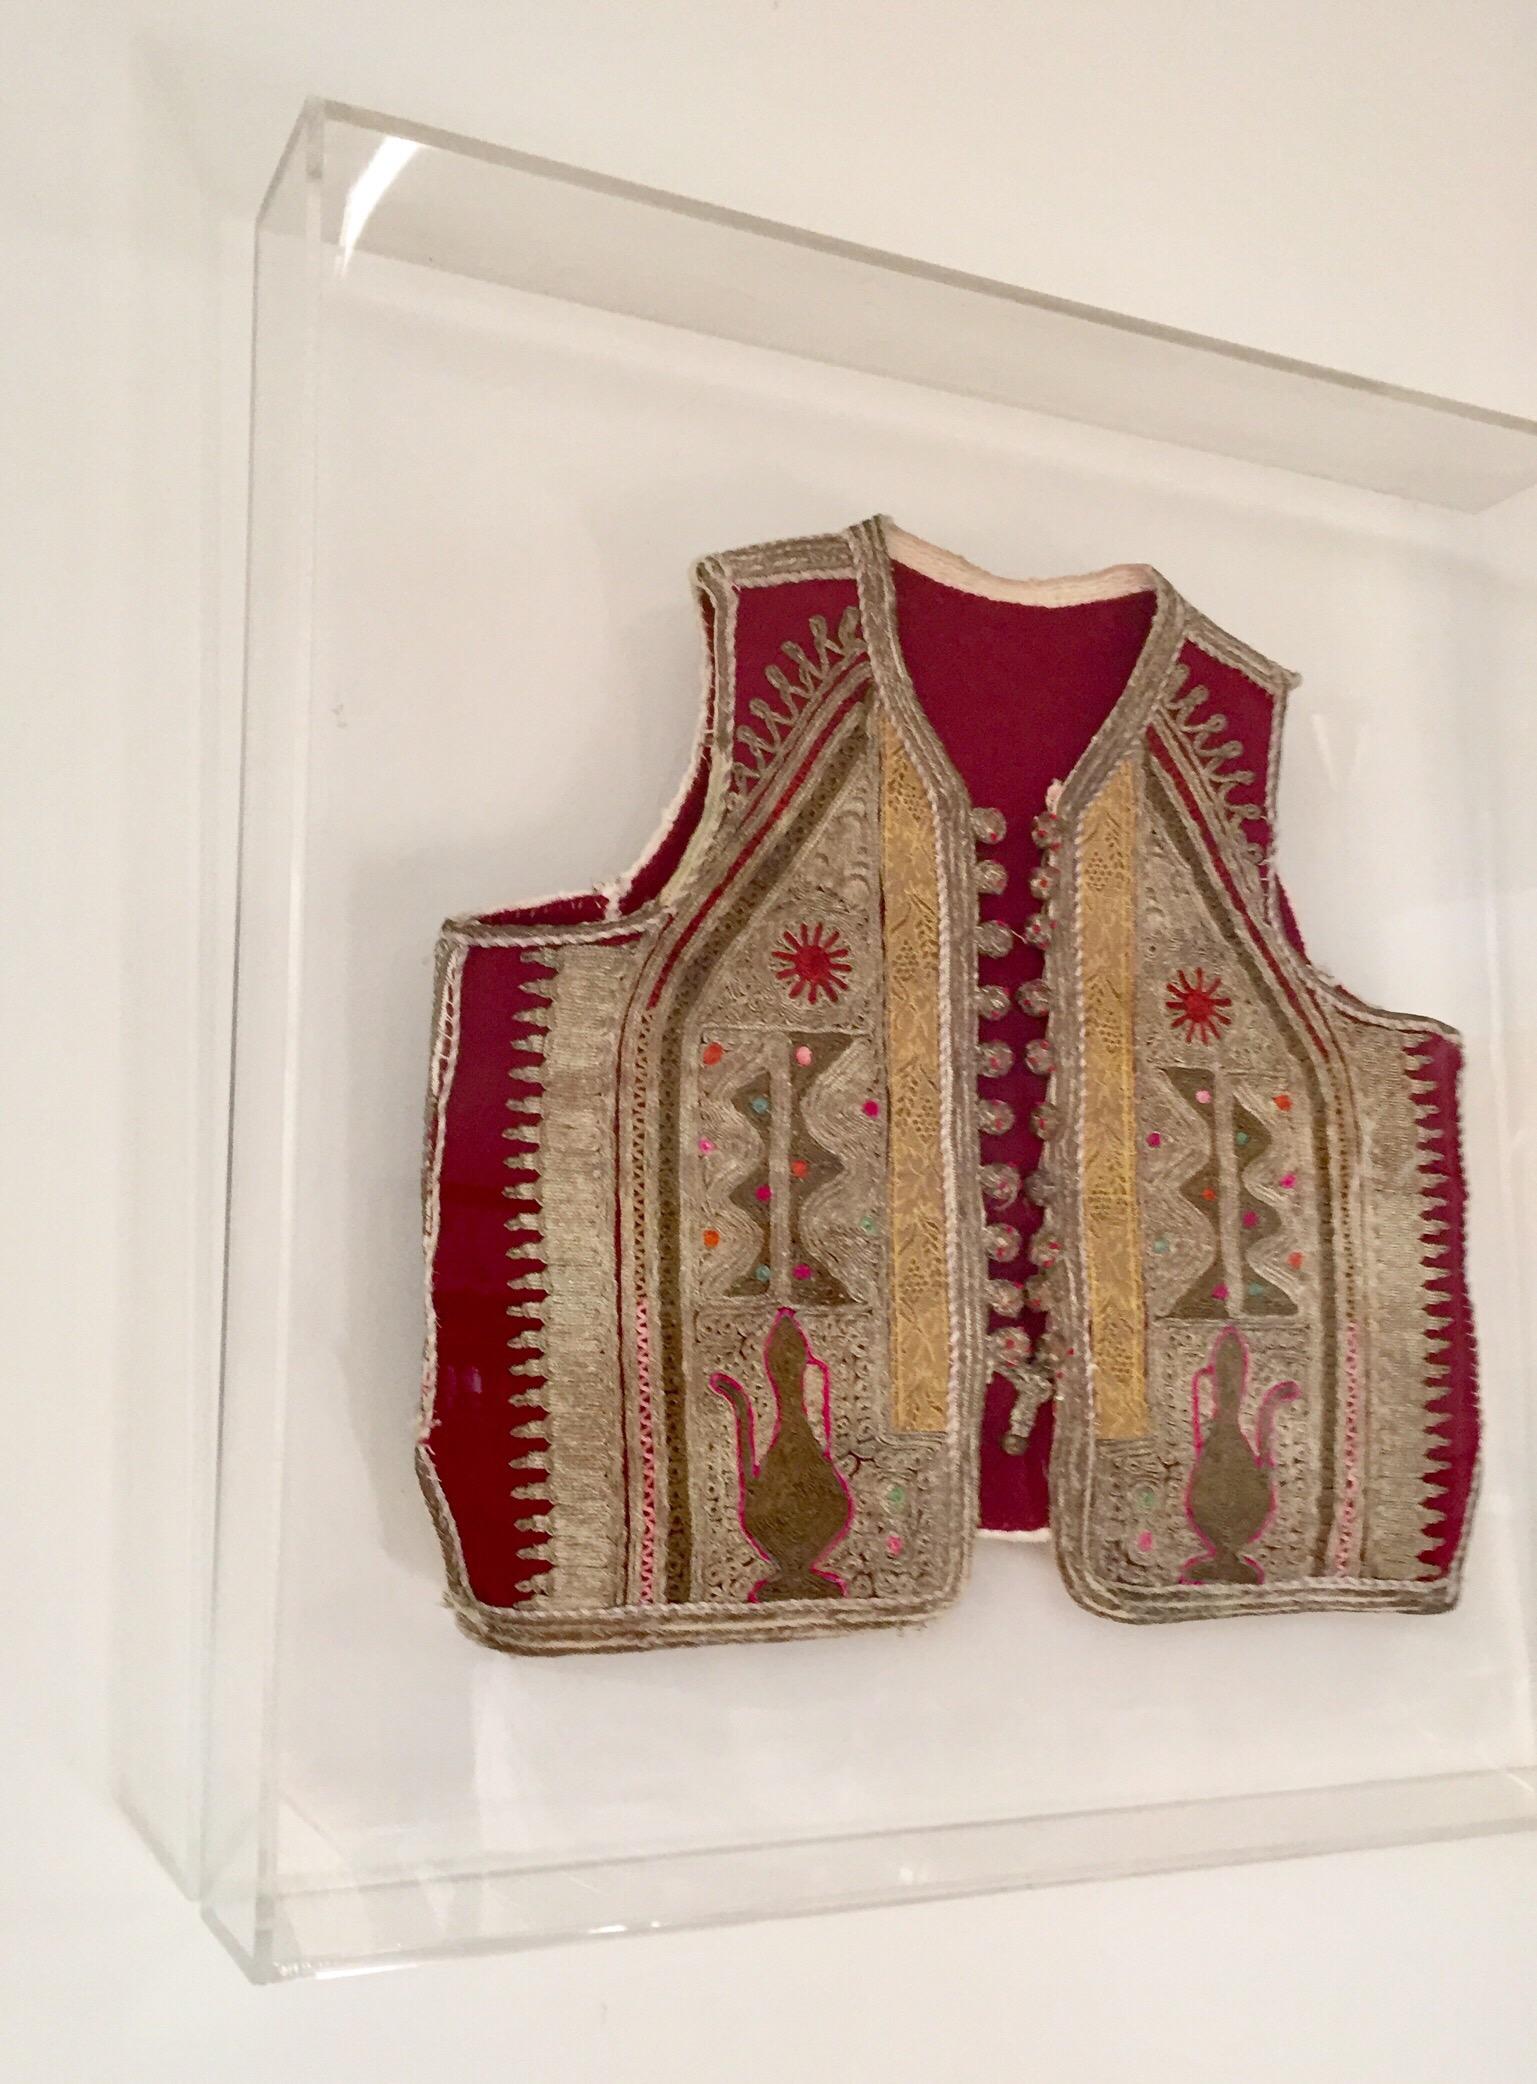 Authentic late 19th century antique ottoman Turkish vest in red velvet decorated with elaborate gold and silver thread, trimmed with gold metallic thread.
Beautifully framed and displayed in a Lucite shadow box
Elegant vest handmade embroidery on